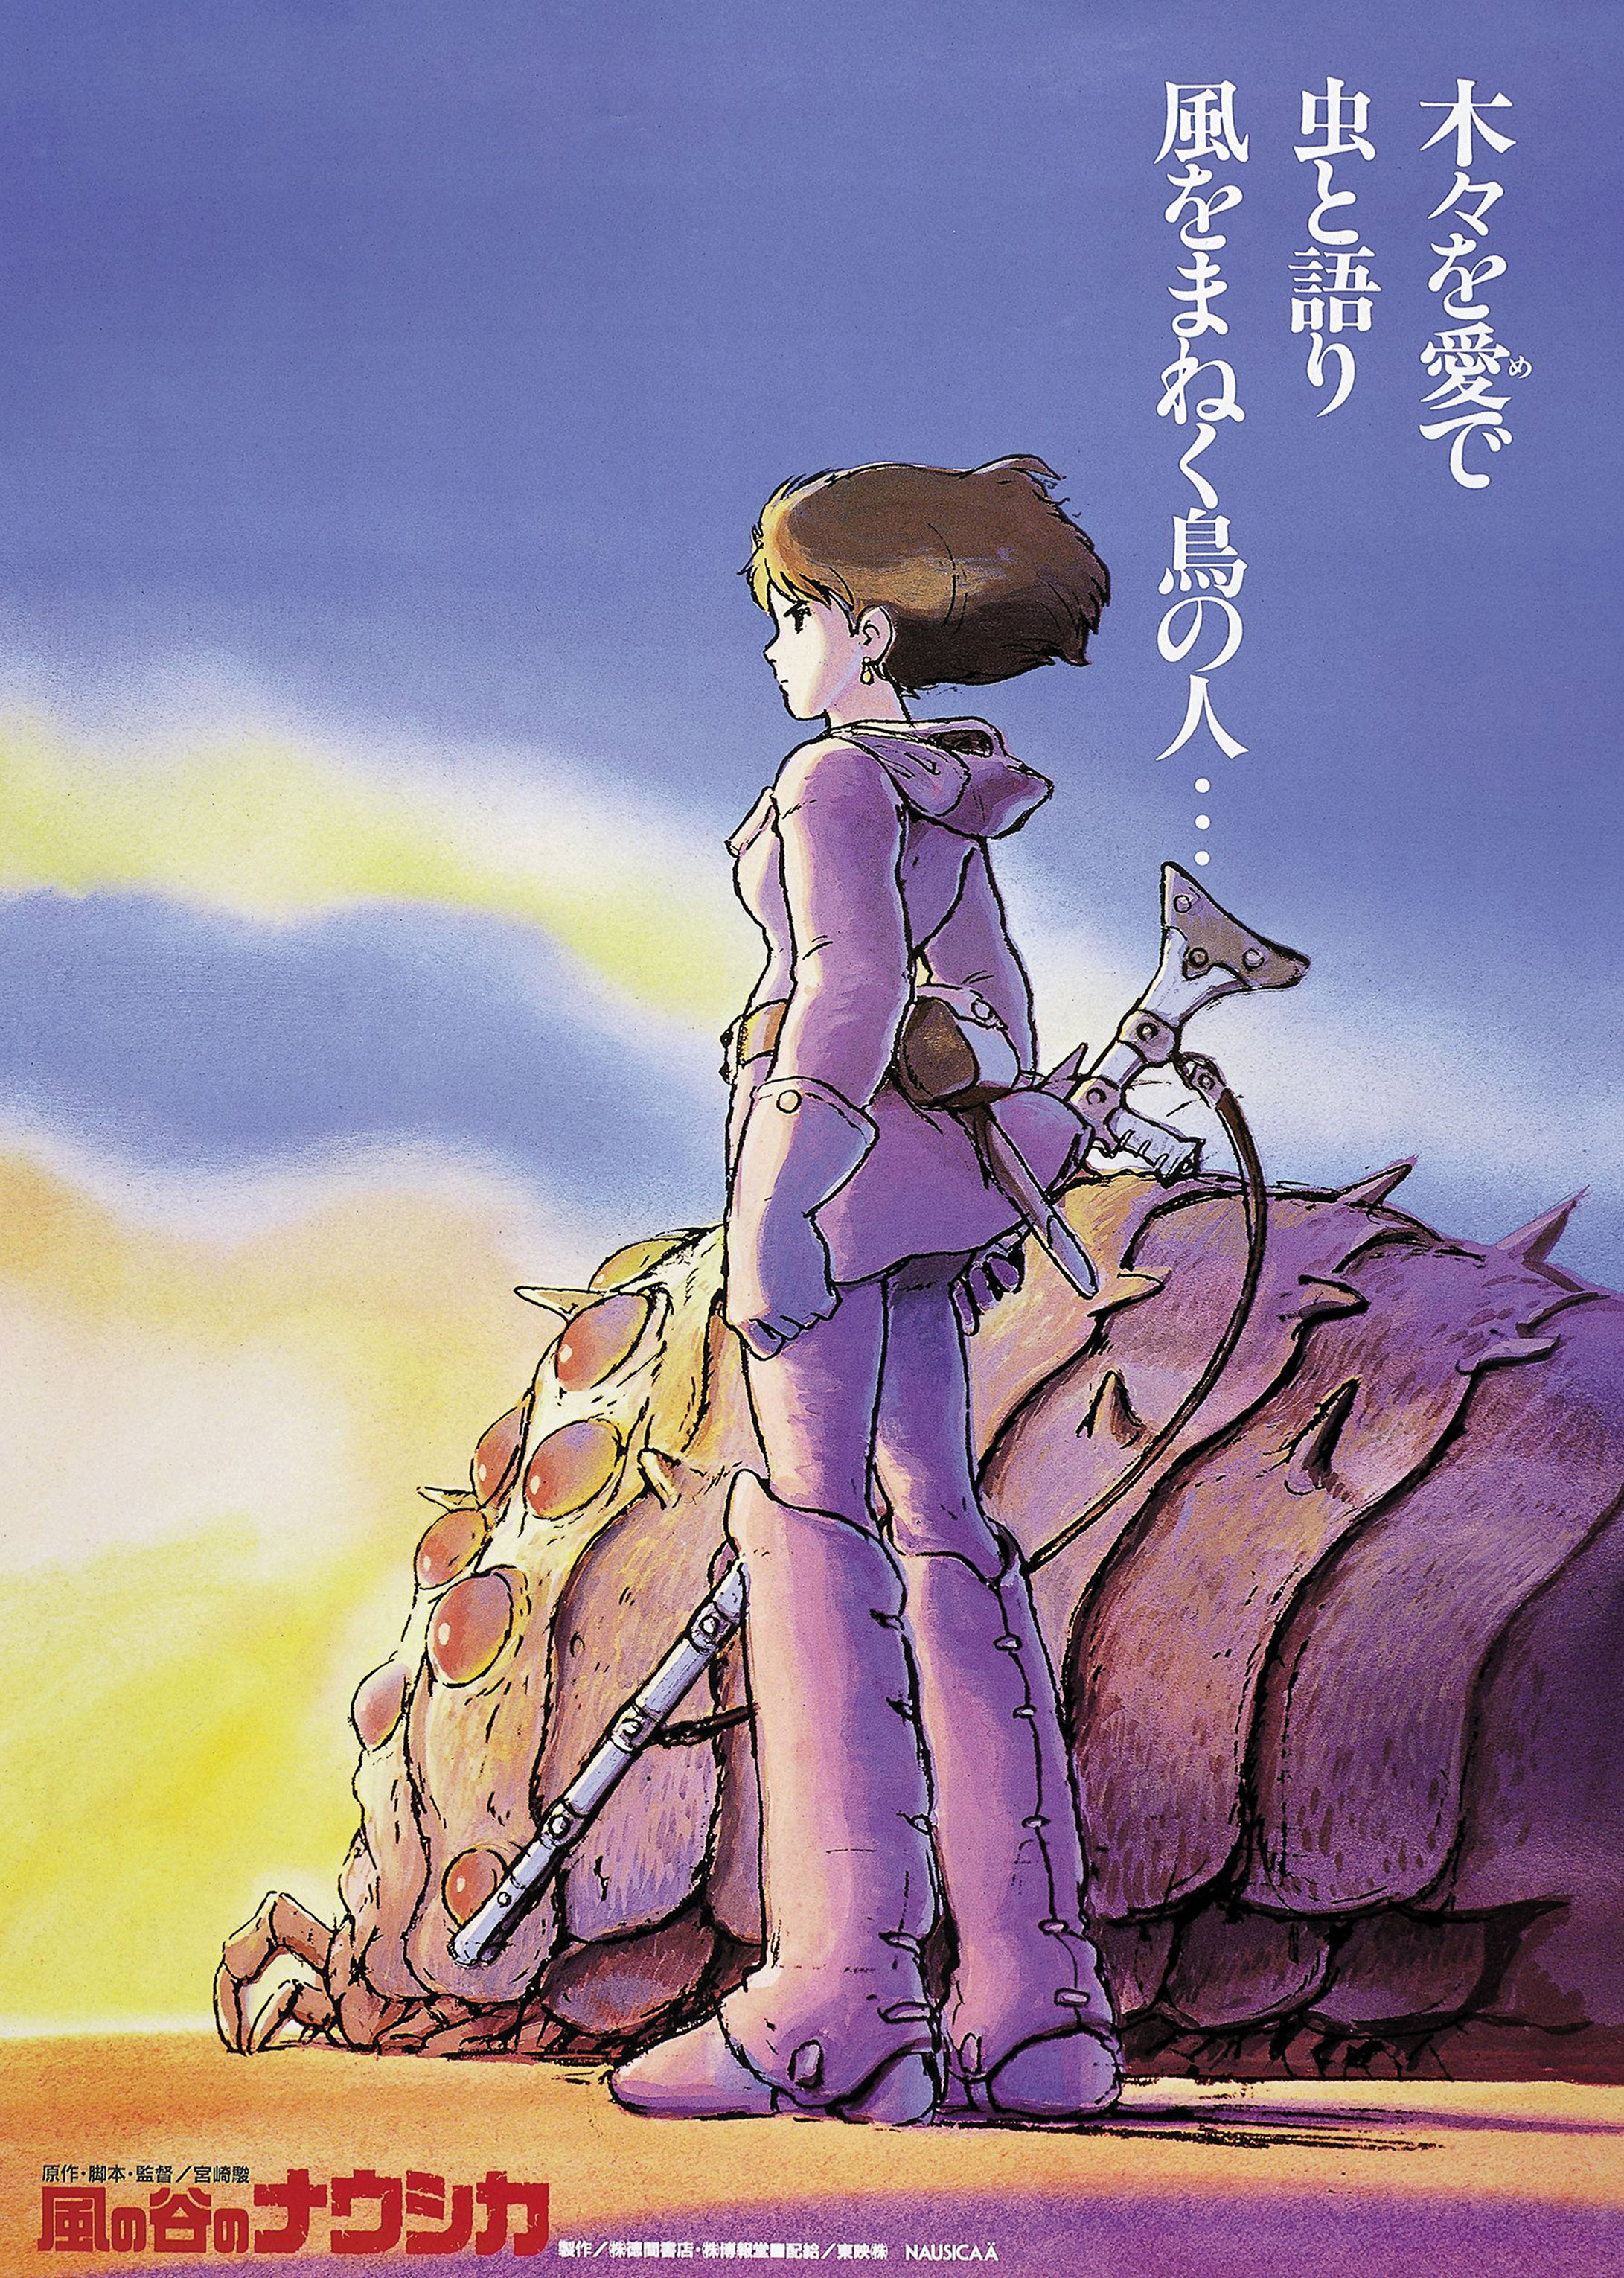 In This Age of Ecological Crisis, Nausicaä’s Message Is More Vital Than Ever